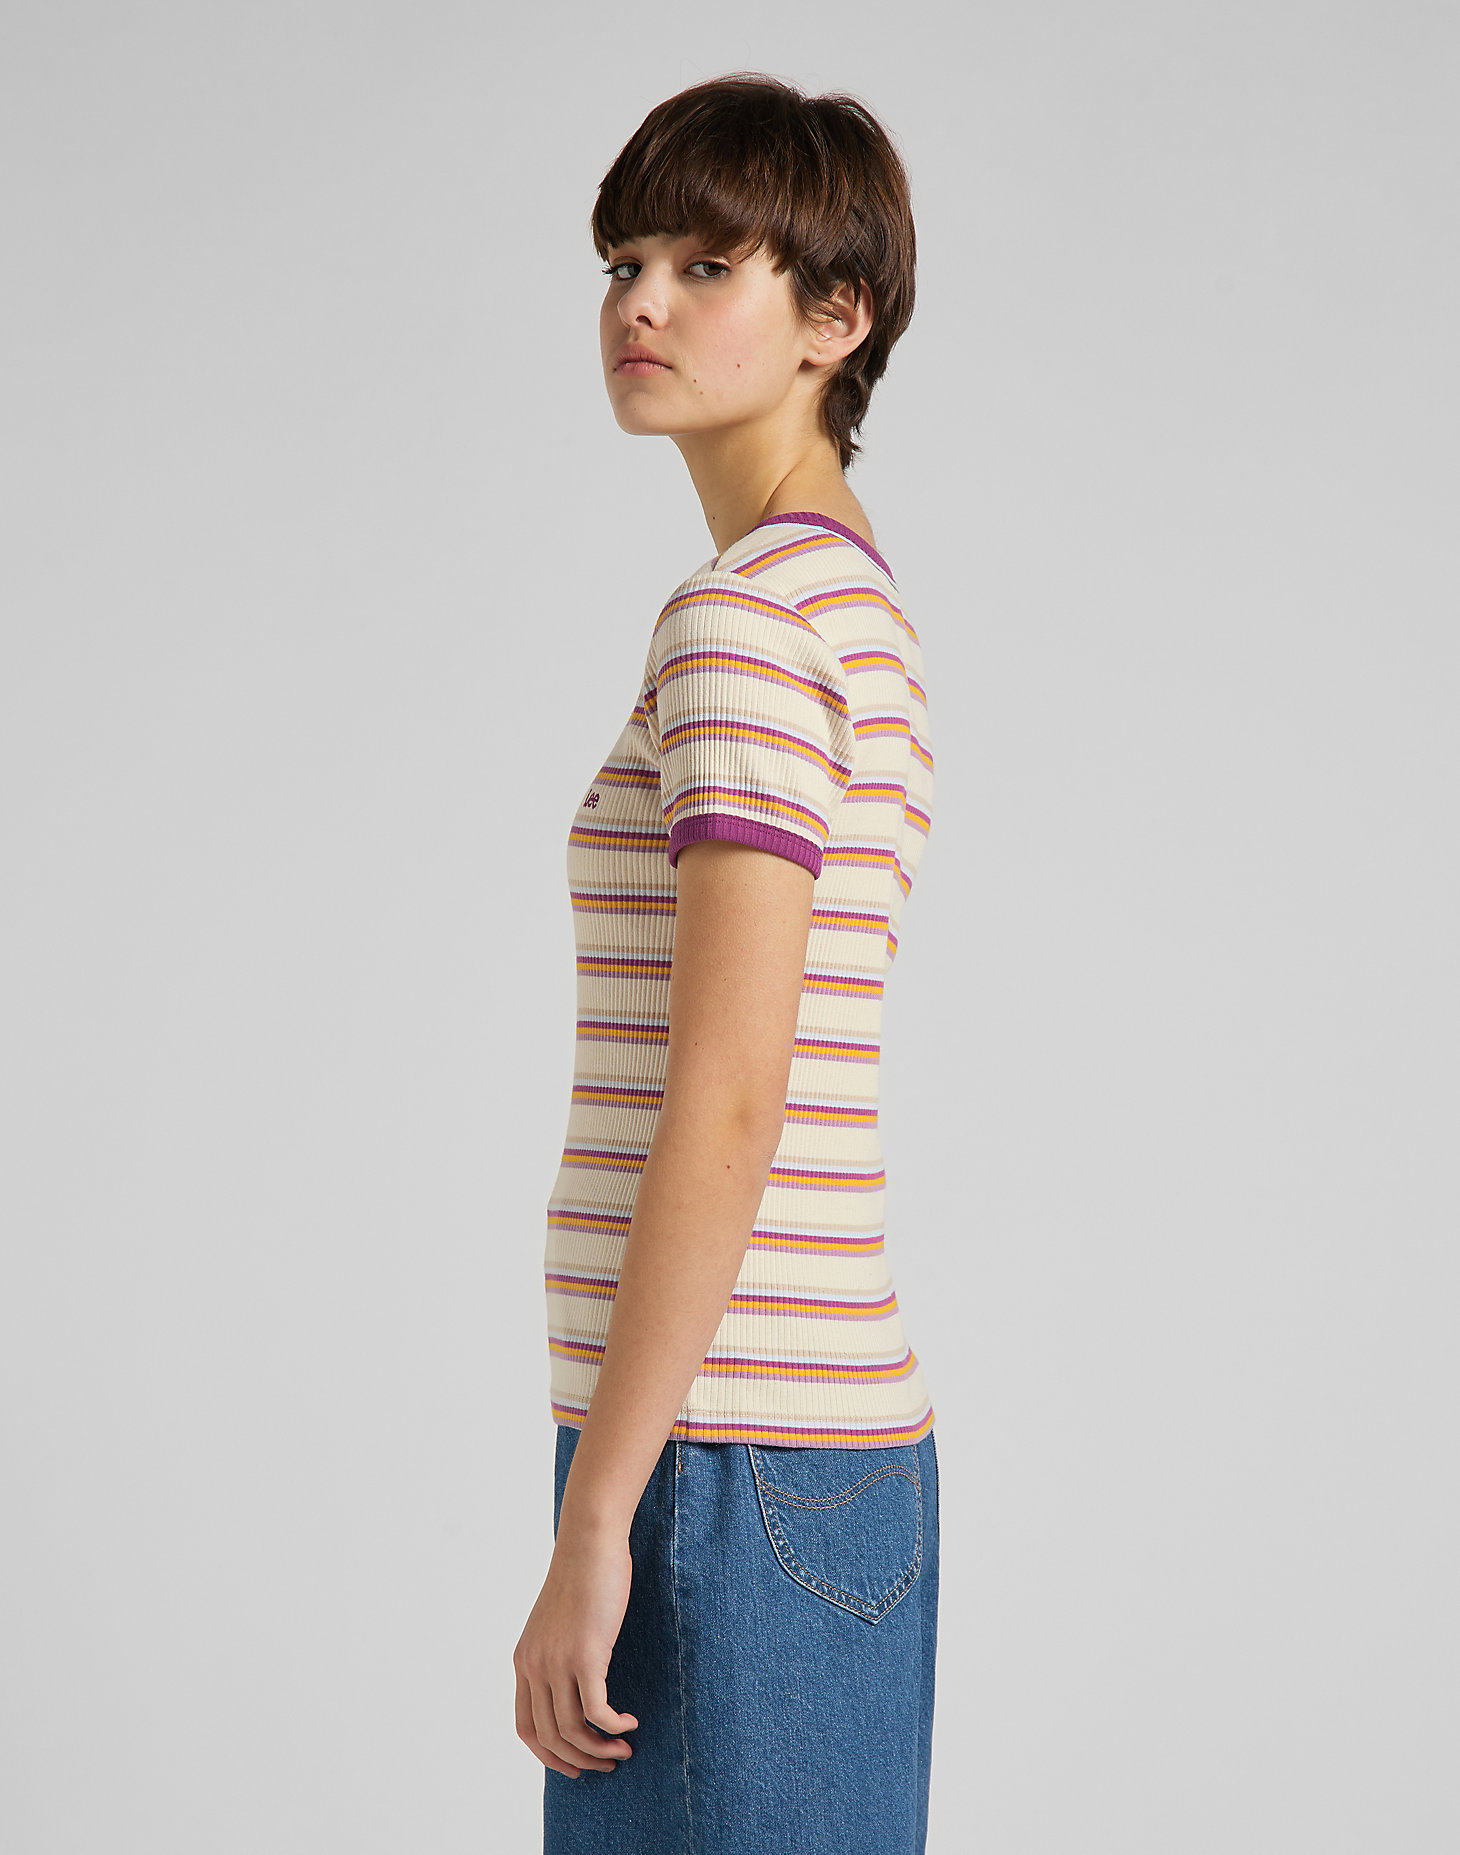 Striped Ribbed Tee in Golden Beam alternative view 3